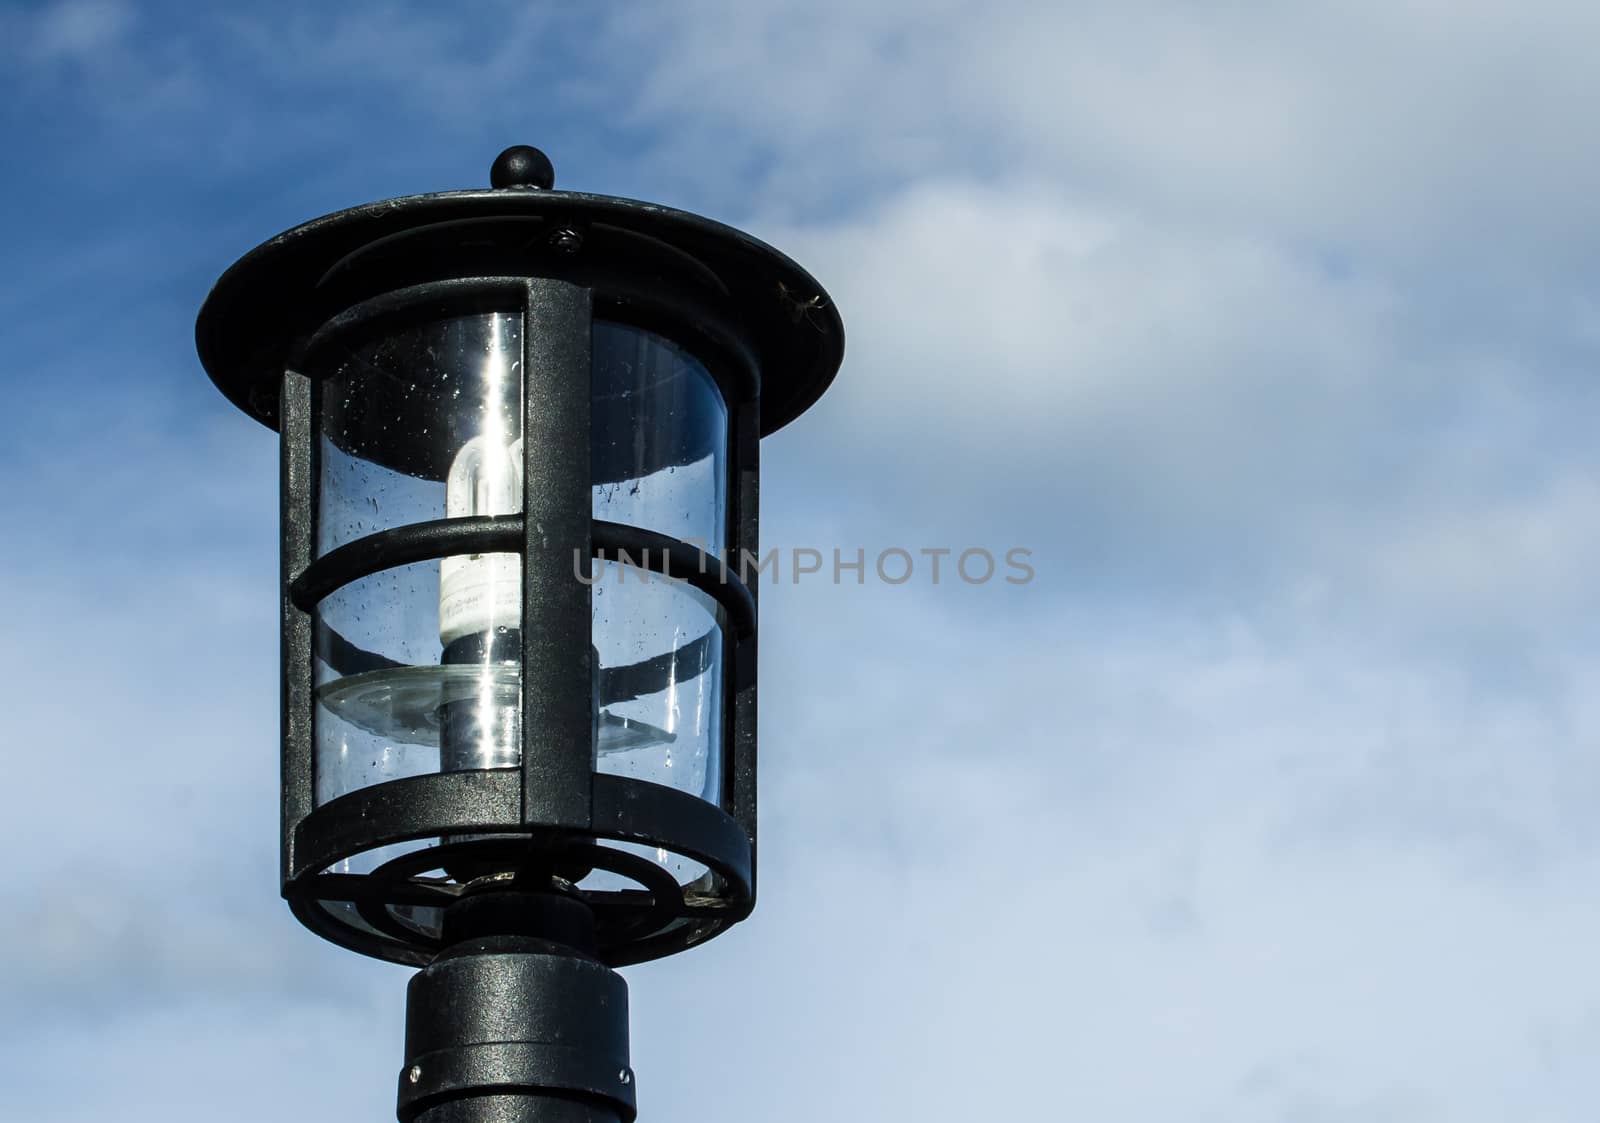 Lamp against the cloudy skies by Alexanderphoto